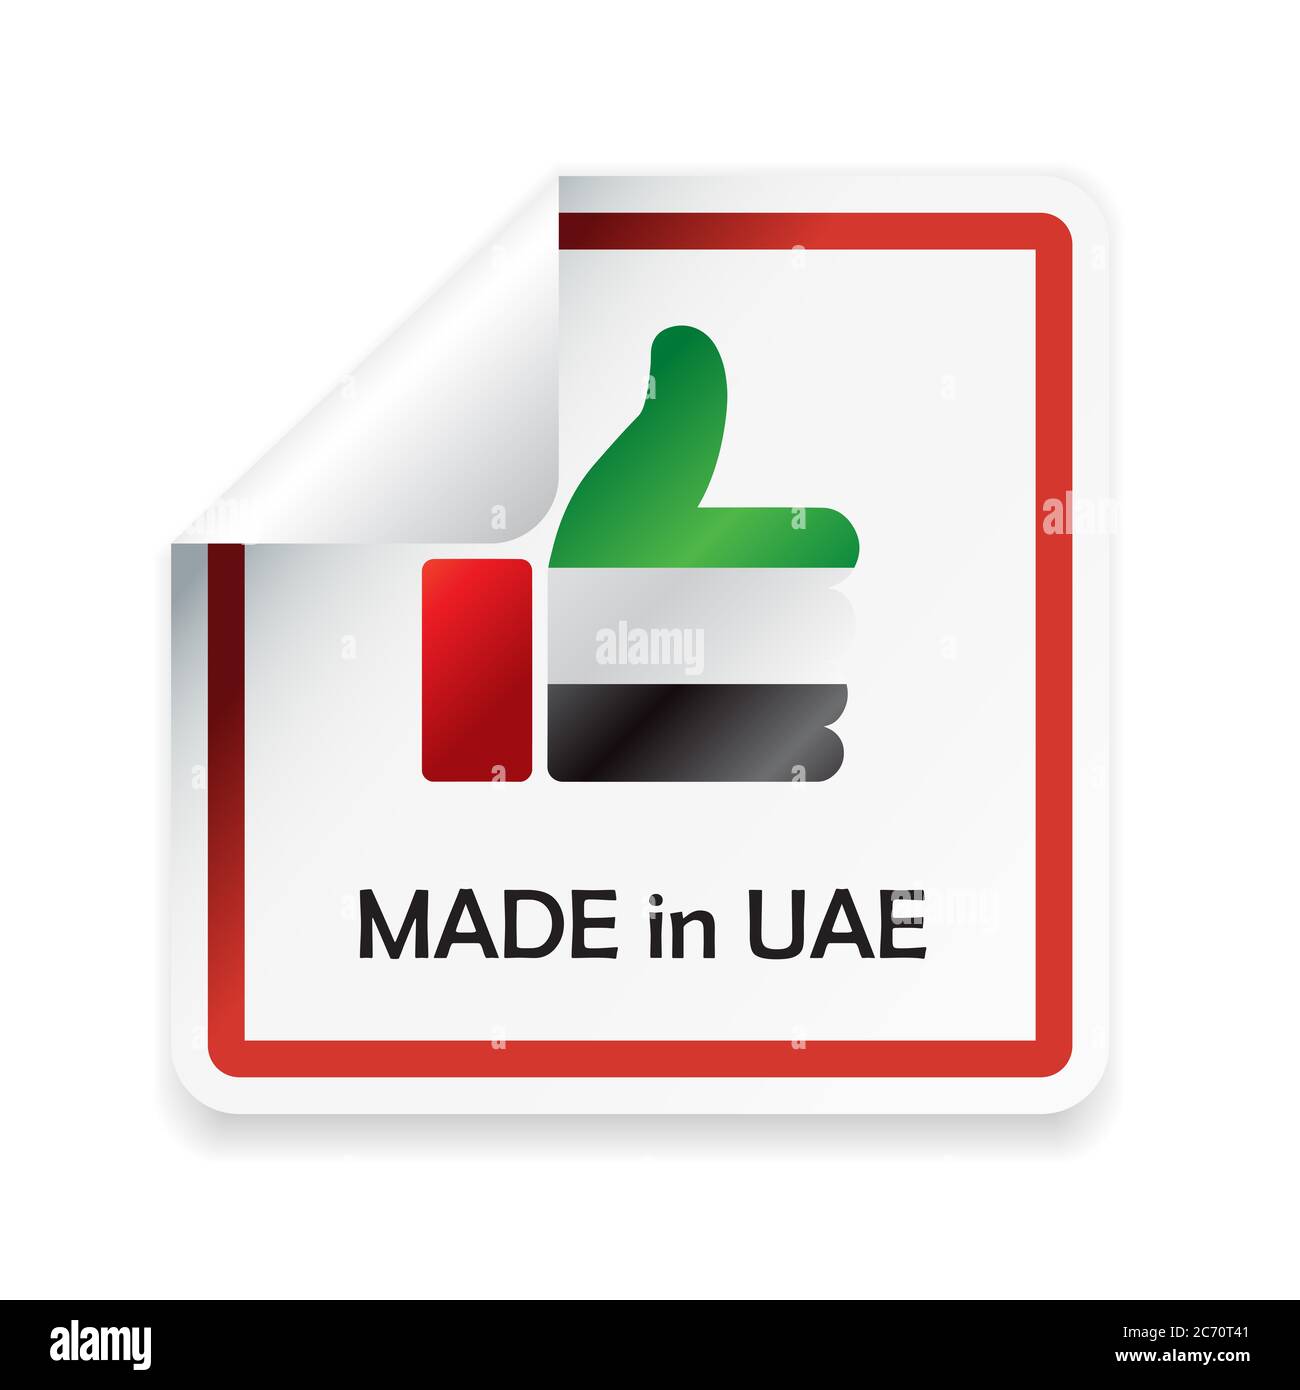 Made in UAE. Icon with thumb up sets the color of UAE flag. Concept of sale or business. Isolated on white background. Stock Photo